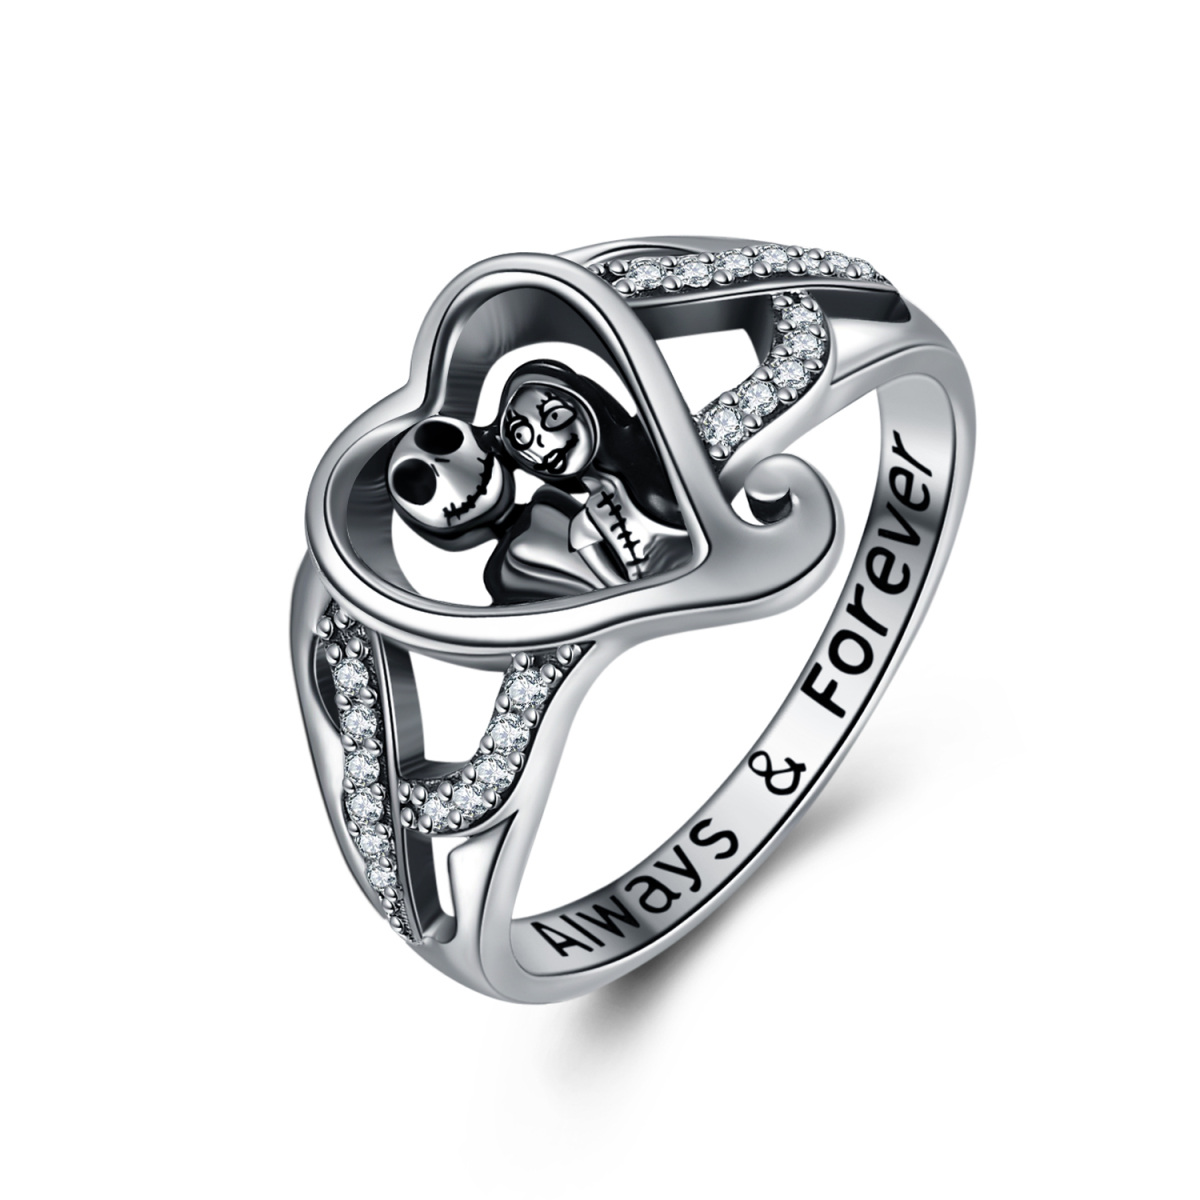 Sterling Silver Circular Shaped Cubic Zirconia Heart & Skeleton Ring with Engraved Word-1